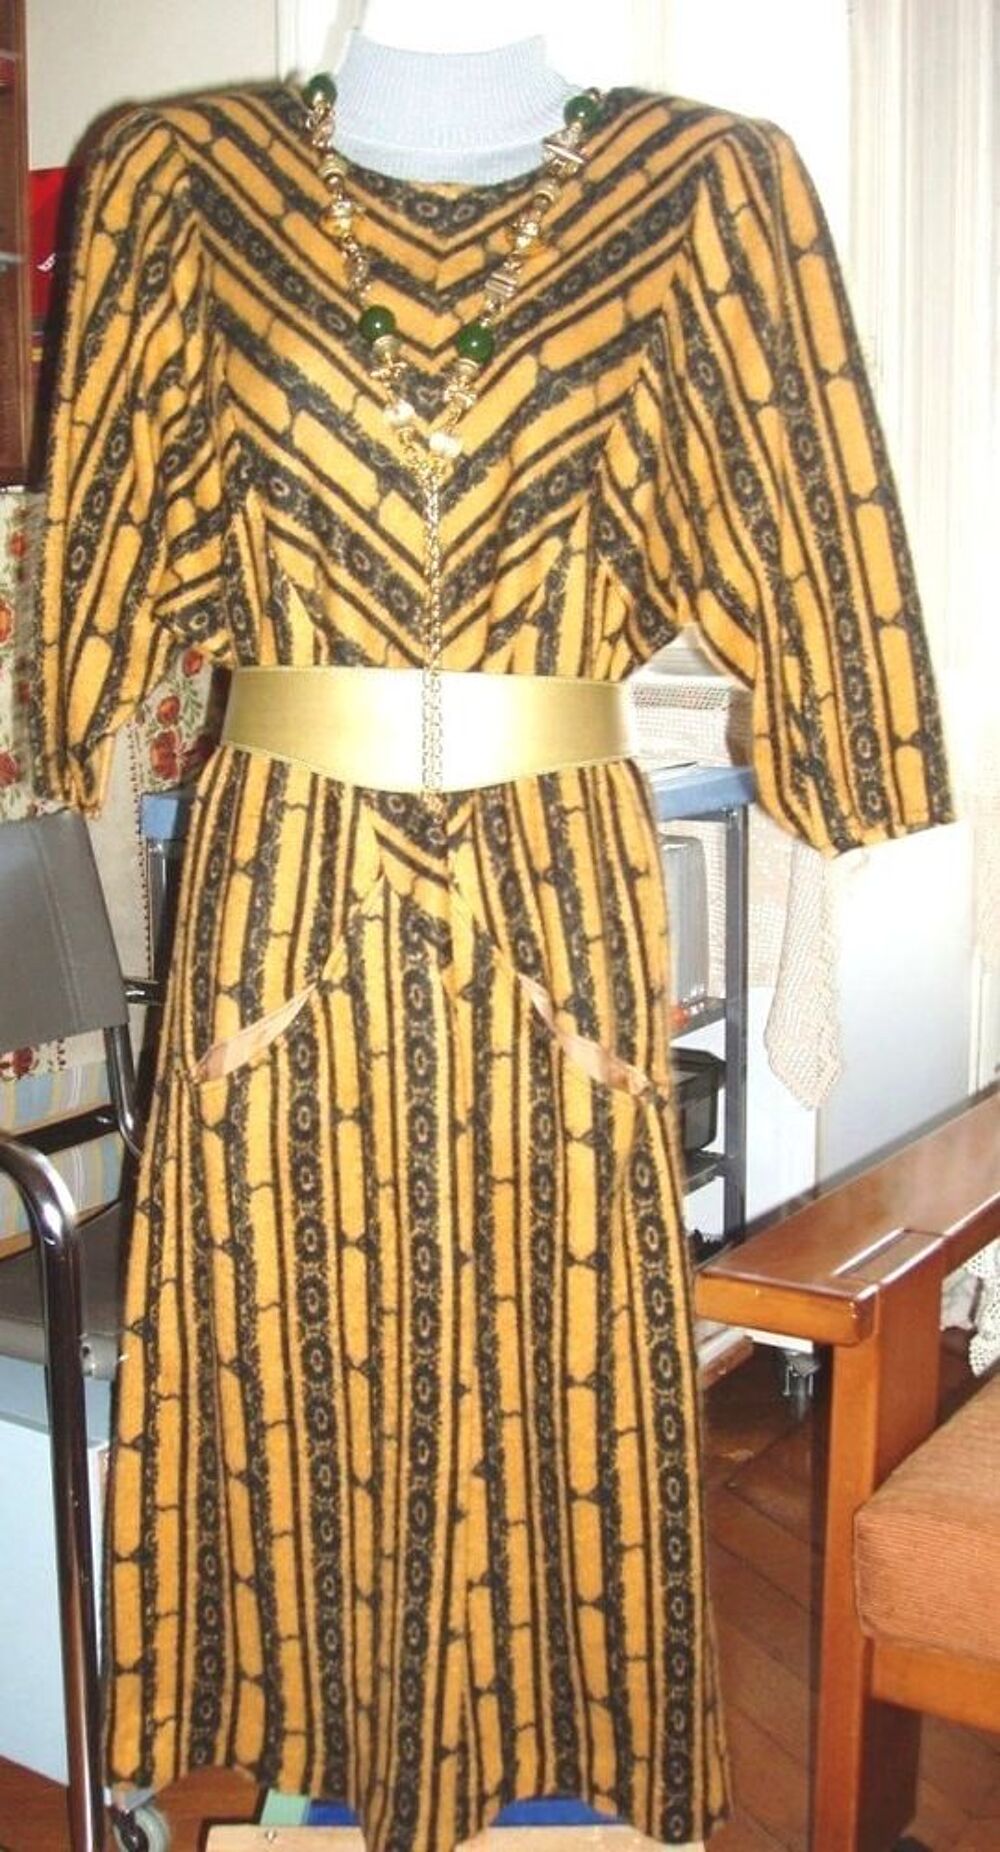 Robe en lainage moutarde taille 40 Vtements